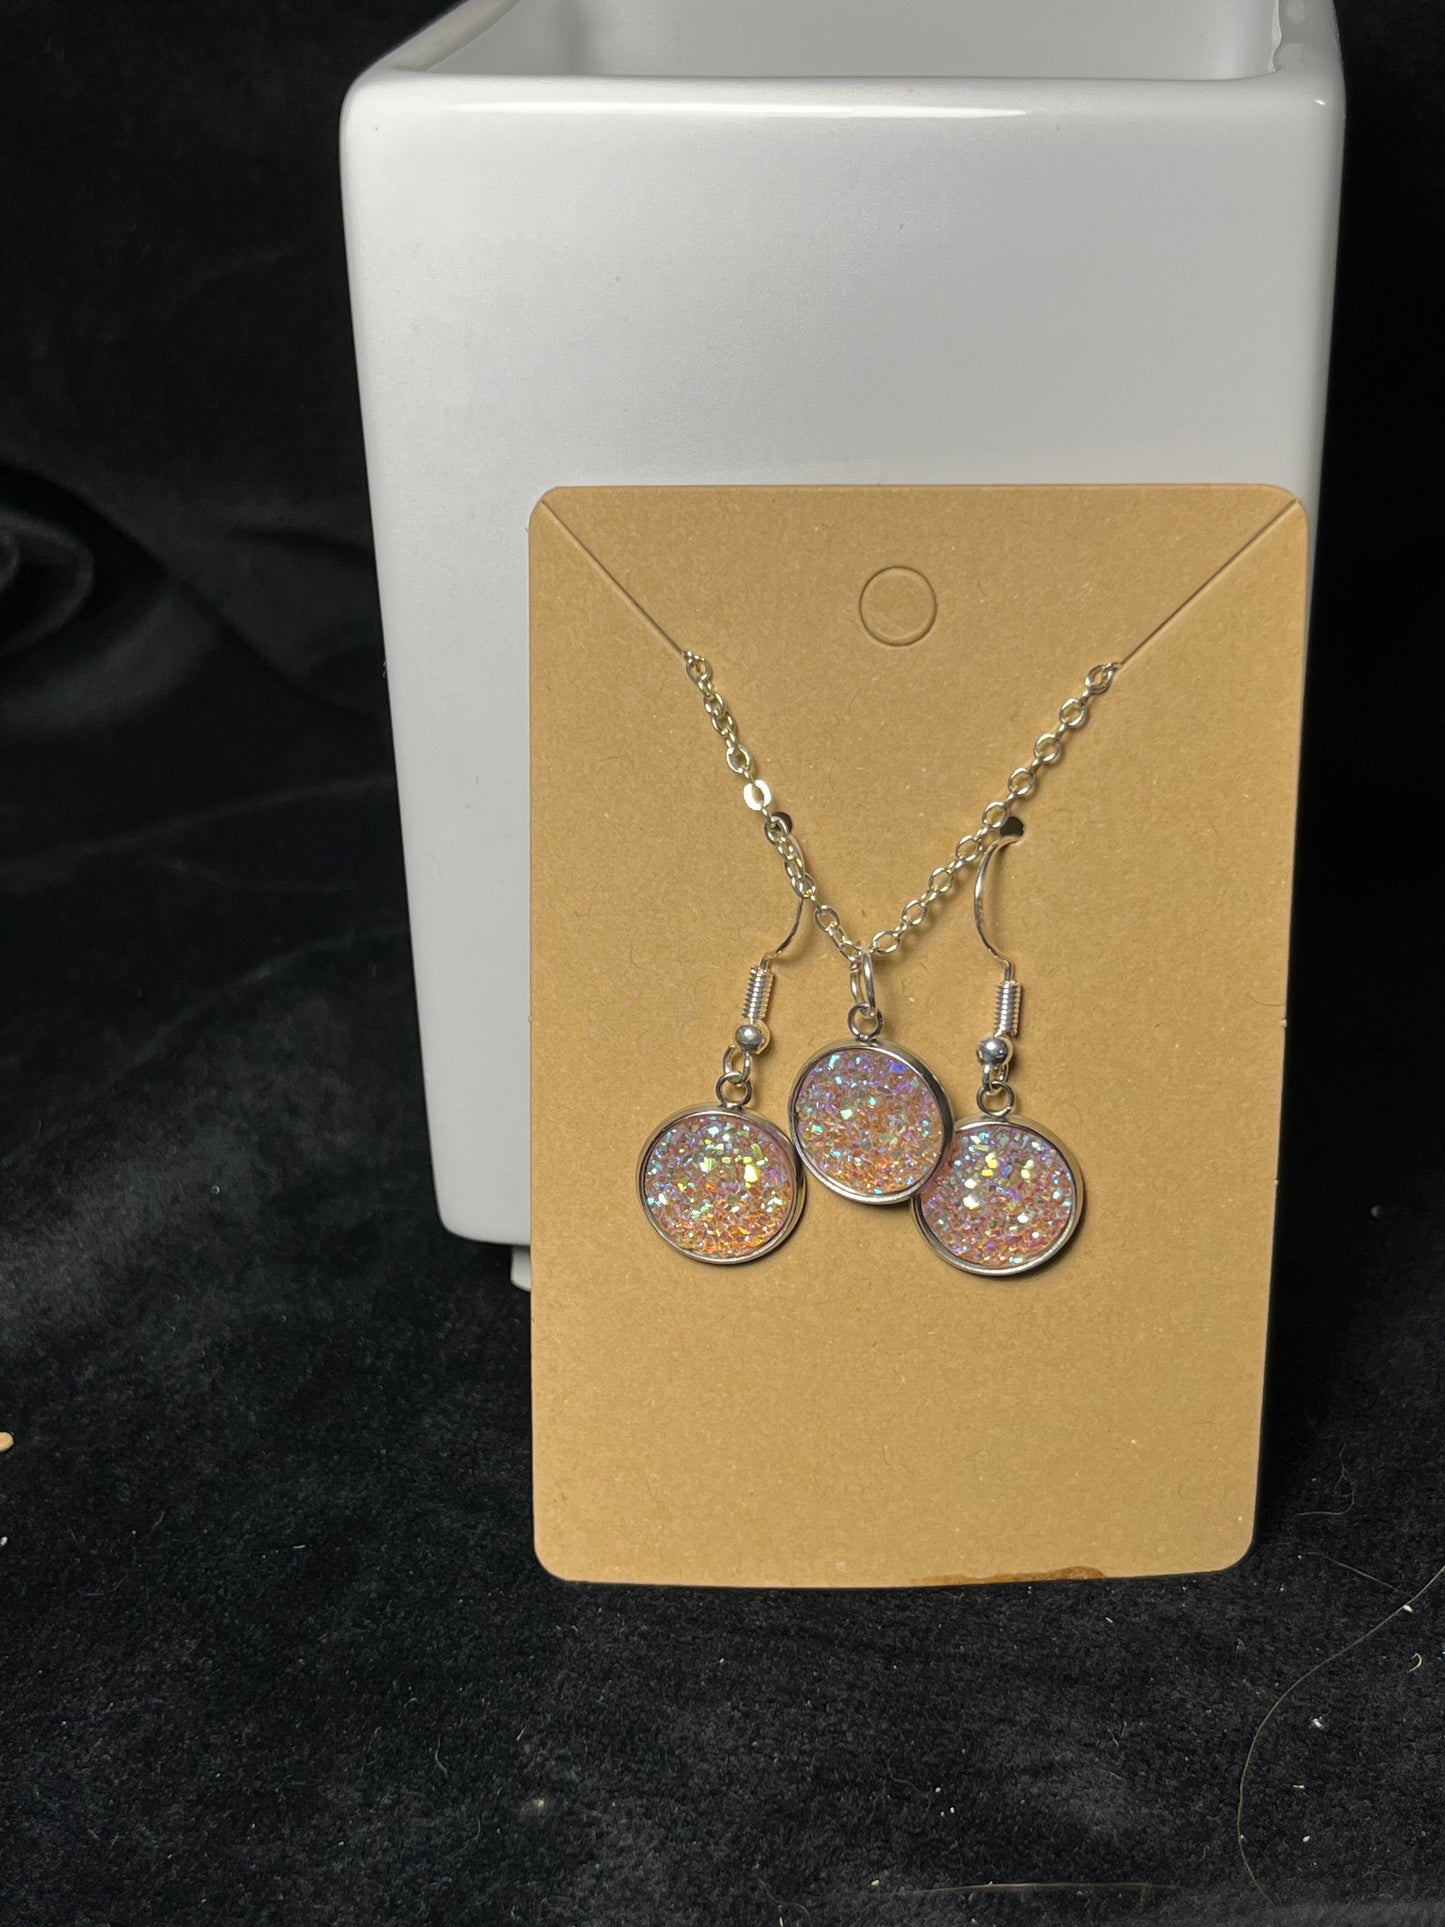 Sparkly Round Cabochon on a silver Chain Necklace with Matching Stud Earrings